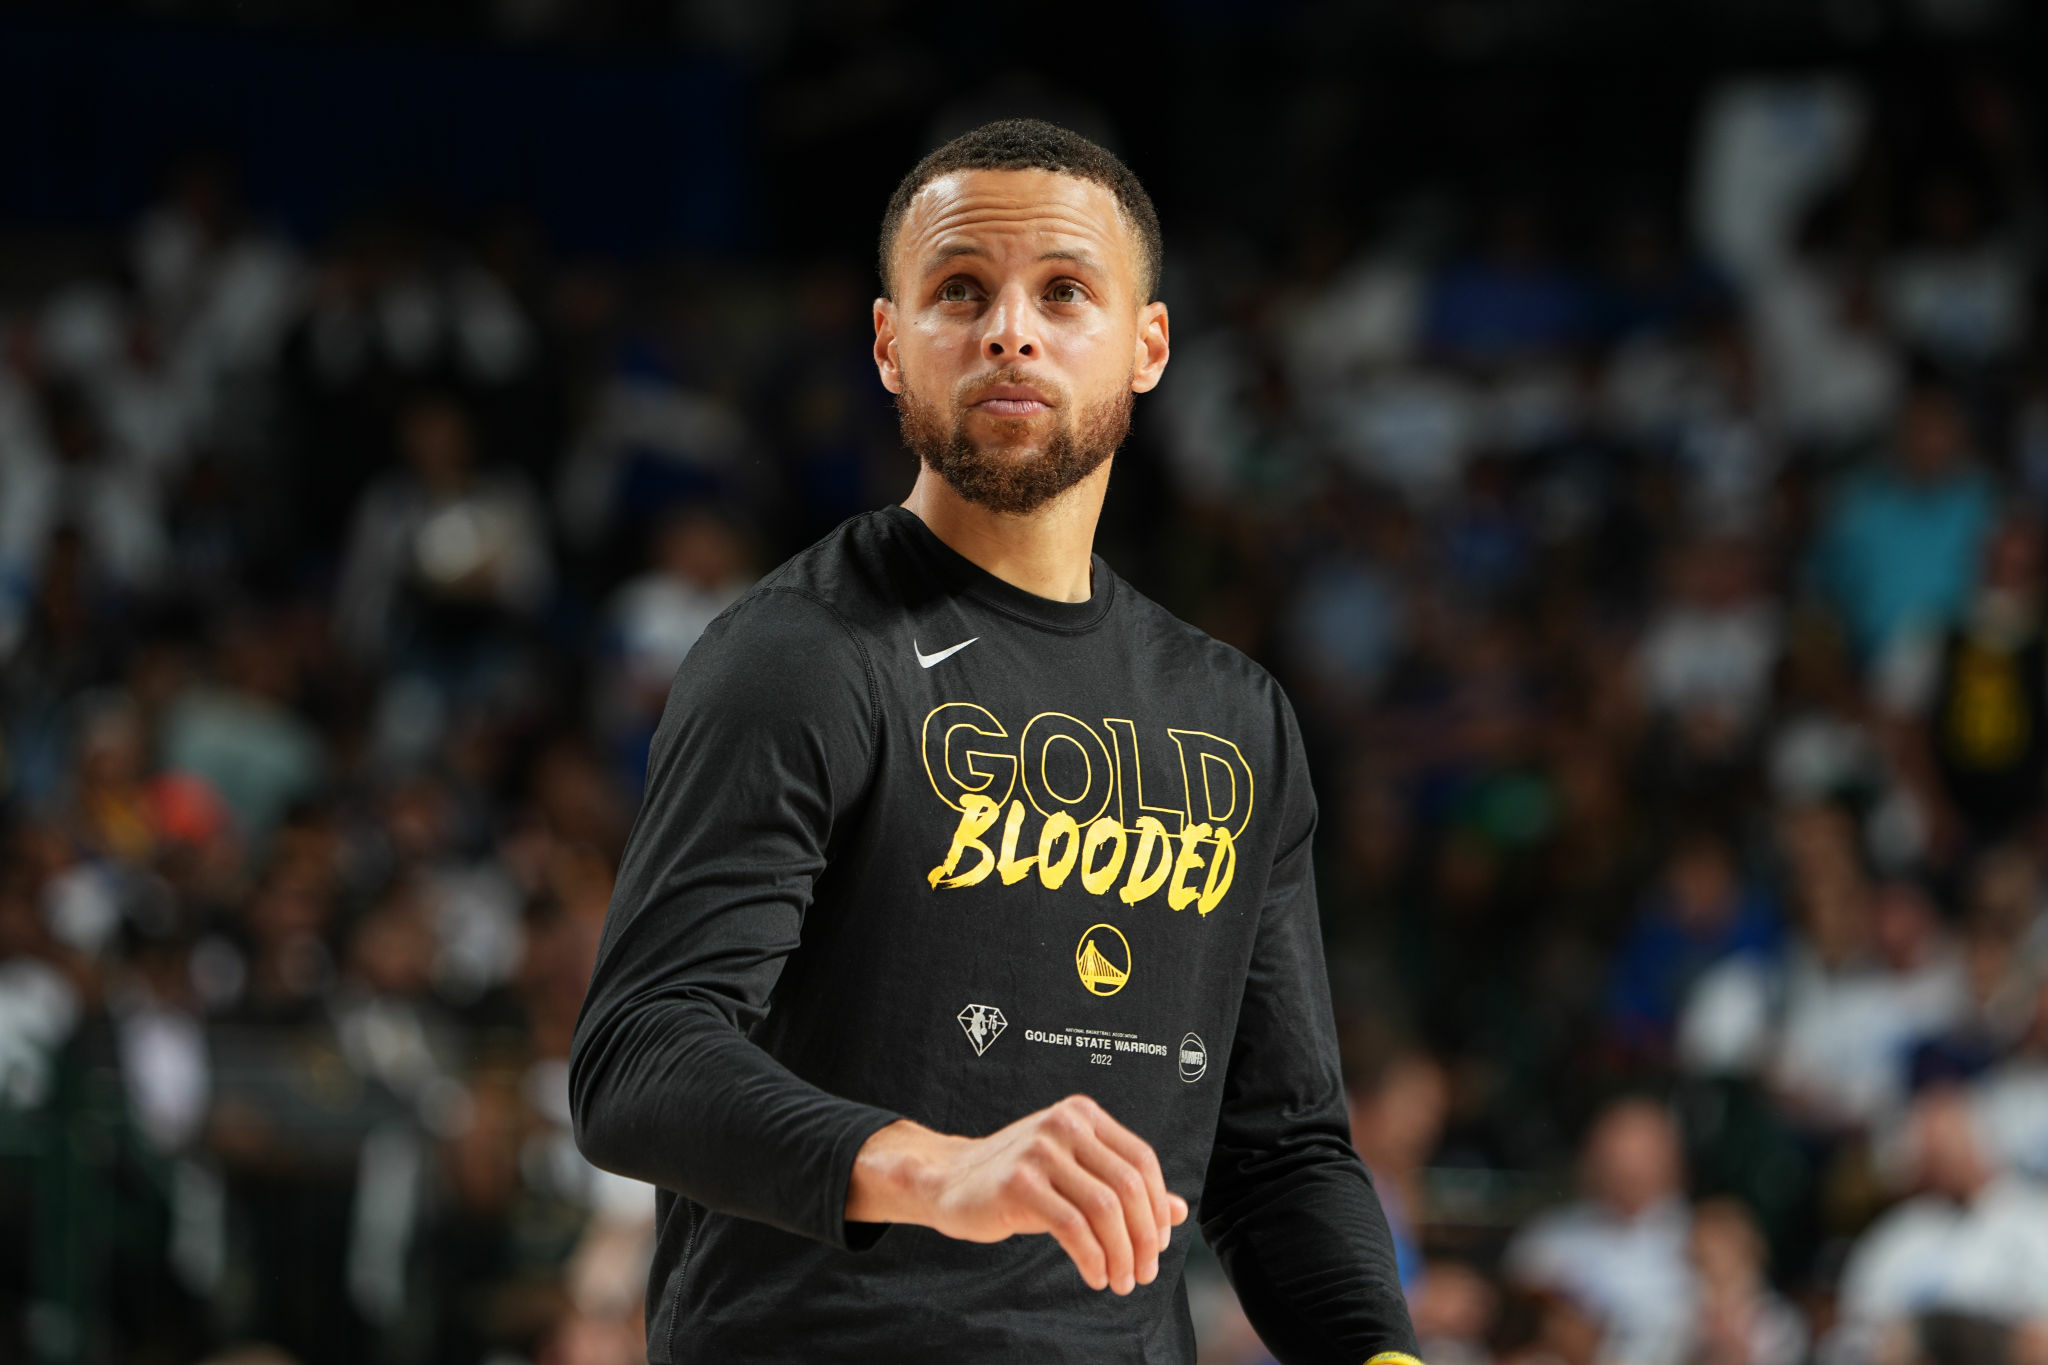 3840x2400  3840x2400 NBA Golden State Warriors Stephen Curry wallpaper   Coolwallpapersme